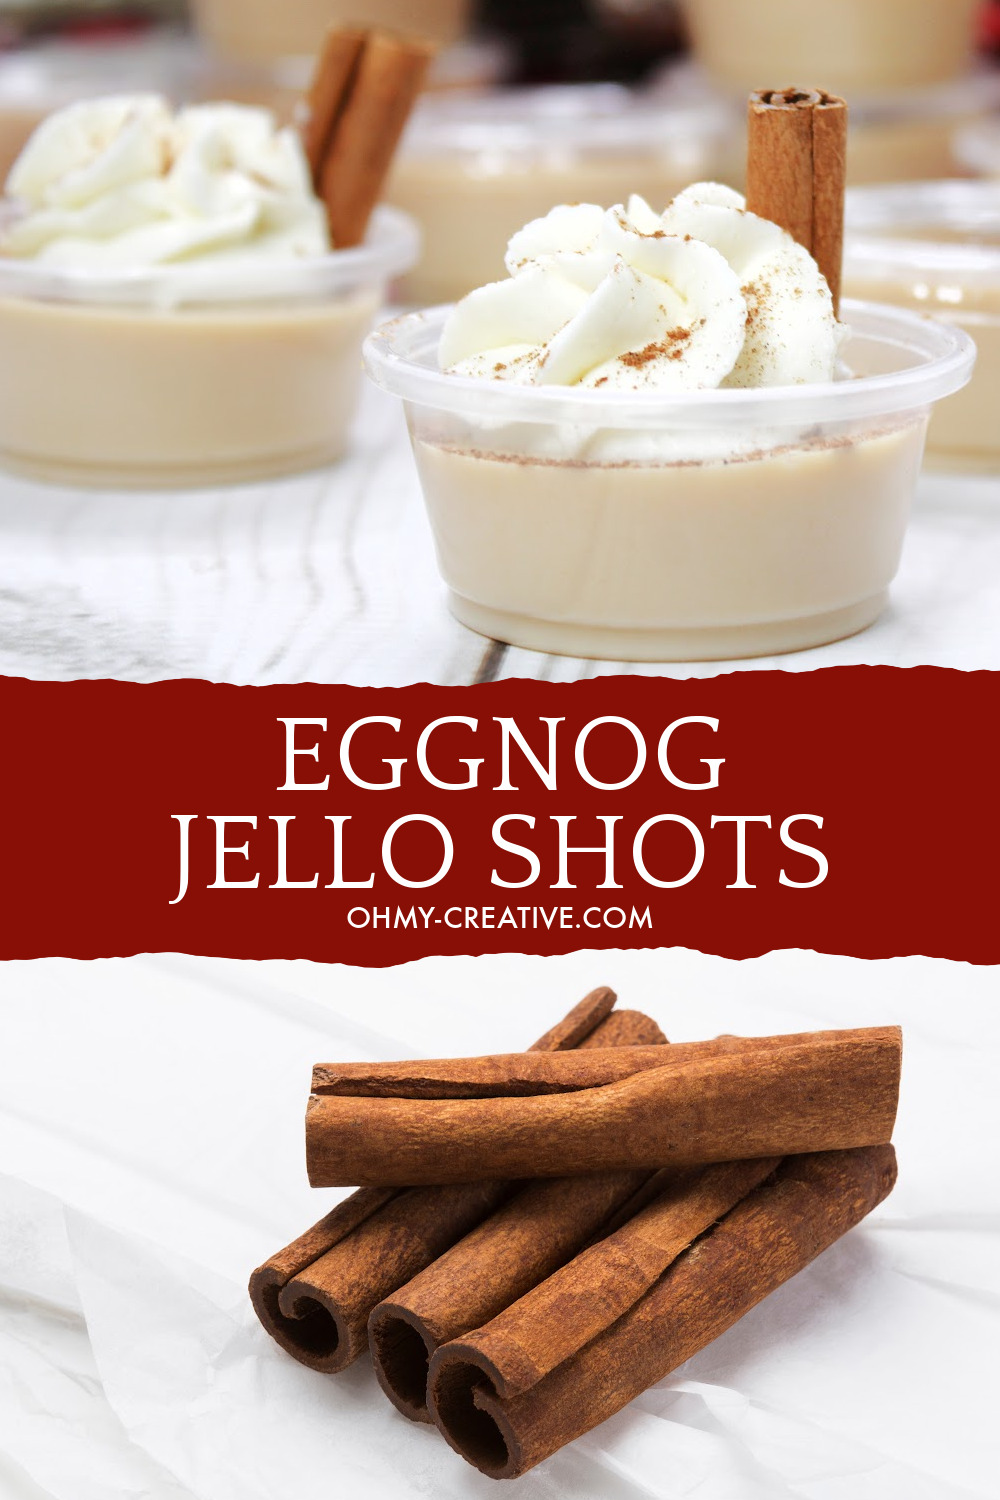 Rich and creamy eggnog jello shots topped with whipped cream a sprinkle of nutmeg and garnished with a cinnamon stick. The bottom photo features a stack of cinnamon sticks.